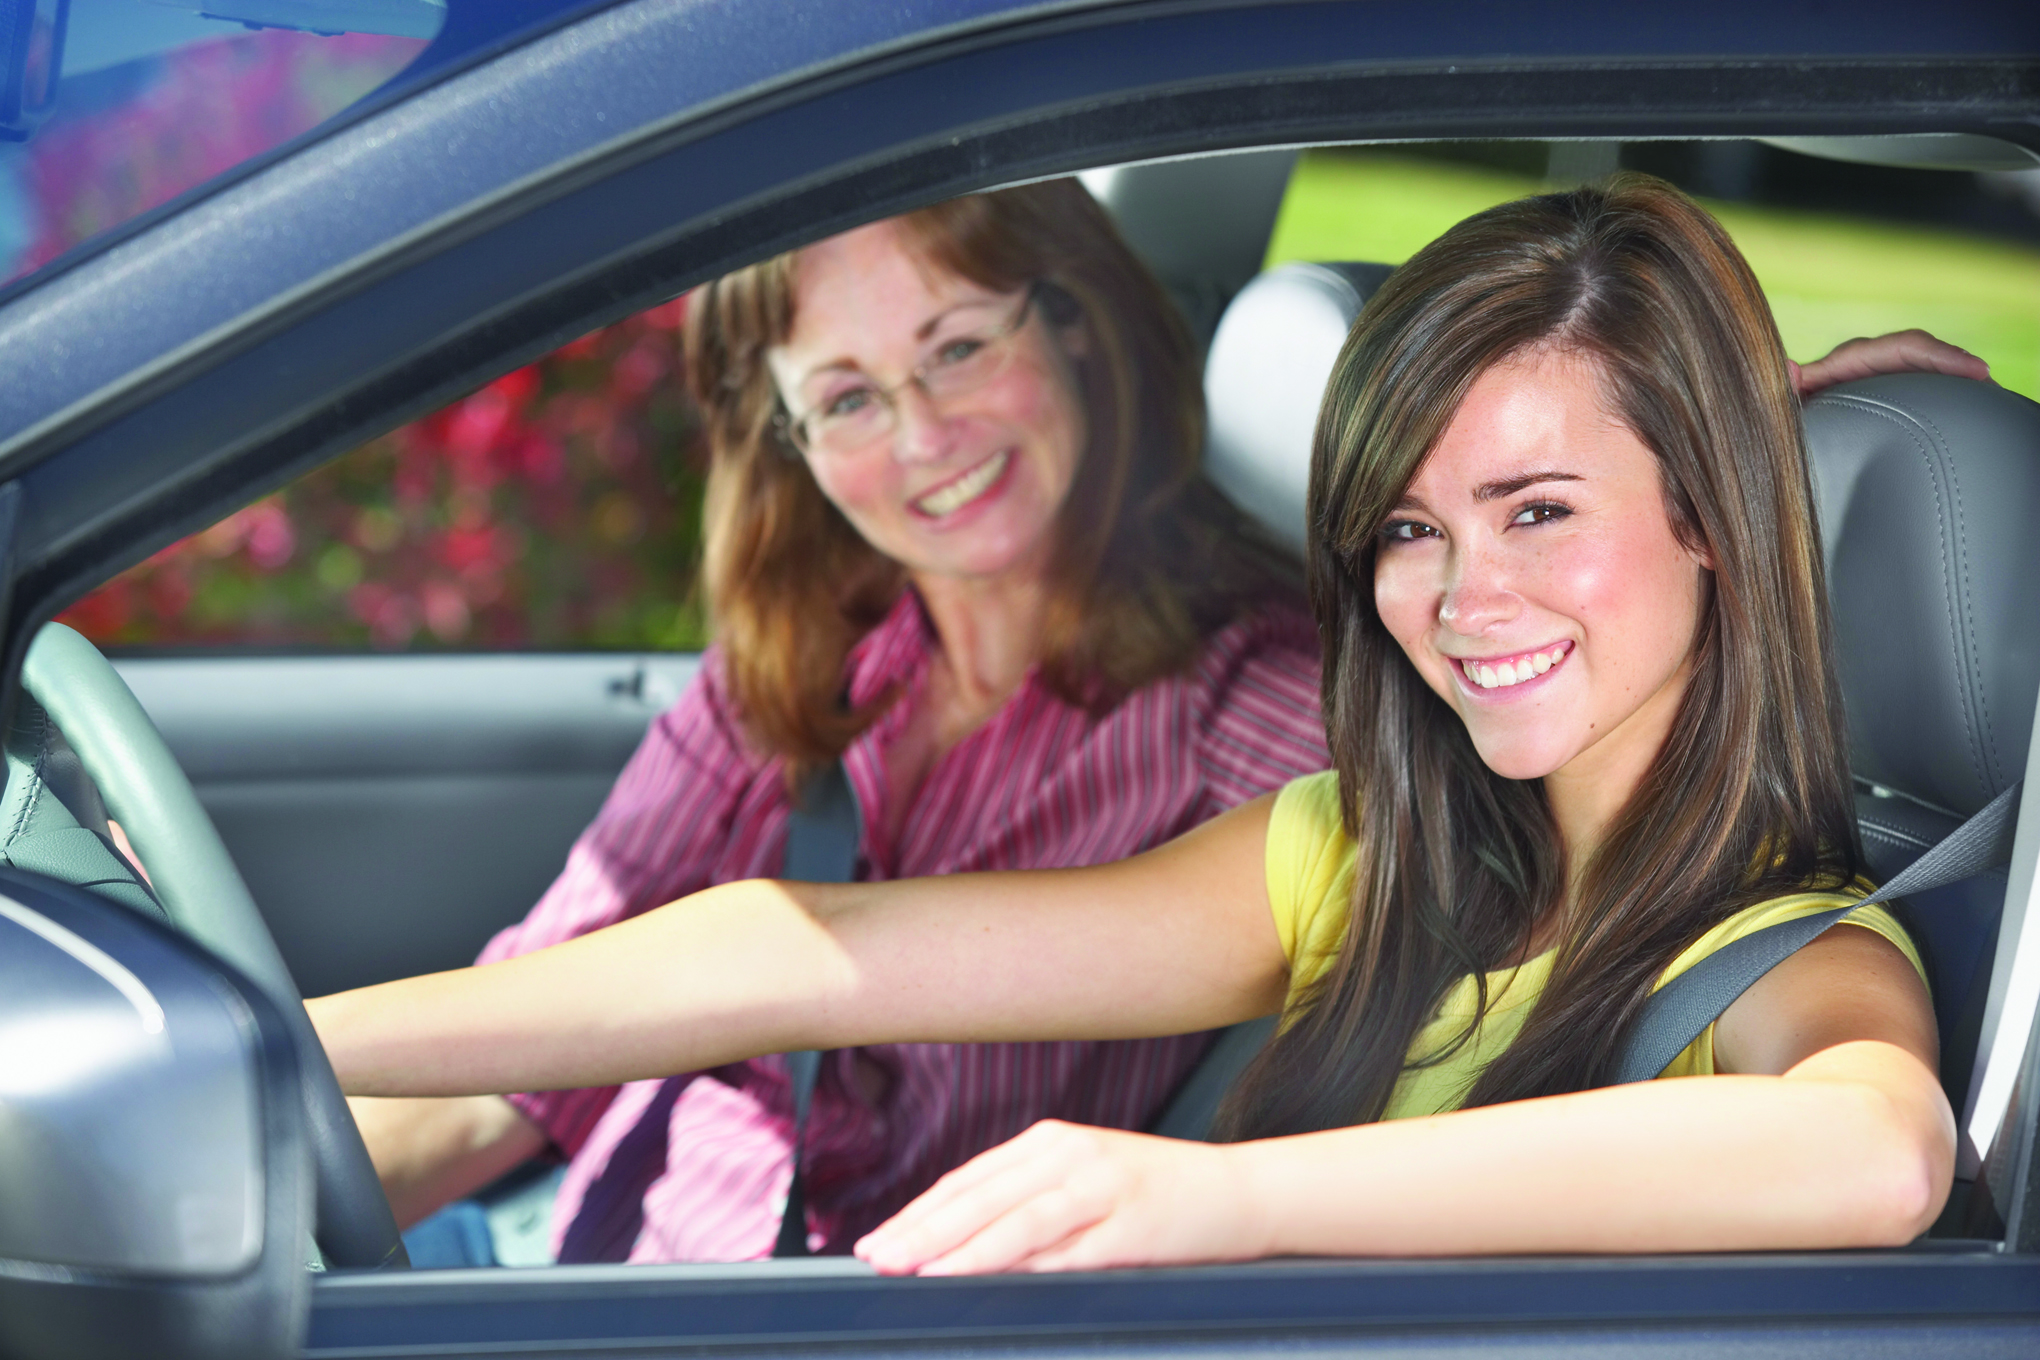 private drivers education classes in melbourne florida